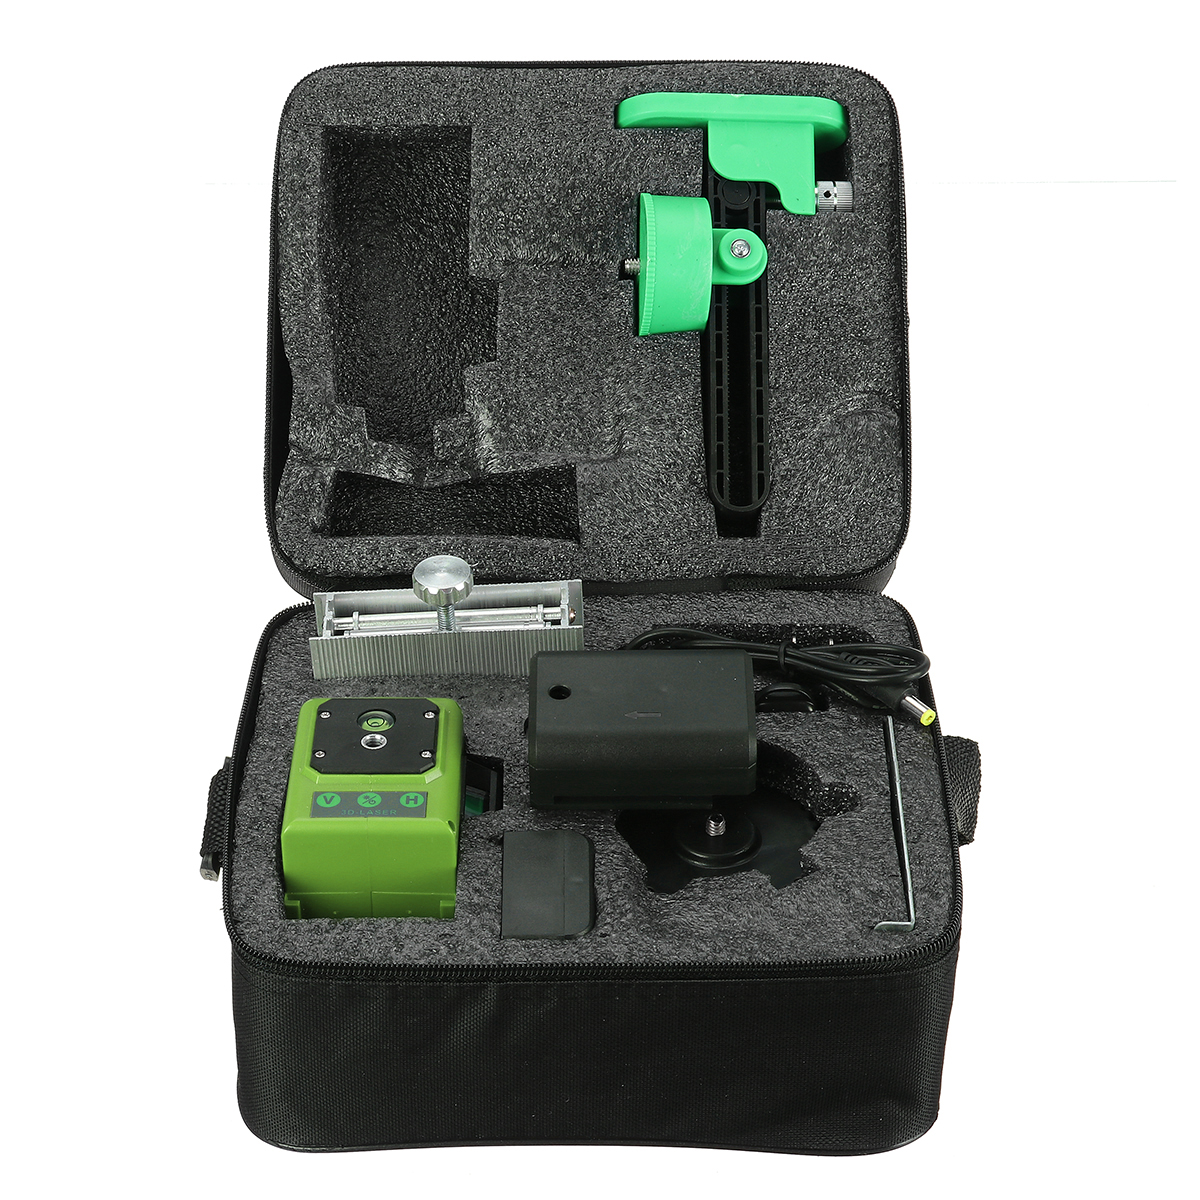 12-Line-Mini-Laser-Level-Green-Light-Wall-and-Floor-Dual-Purpose-Automatic-Wire-Bonding-Infrared-Lev-1903599-16